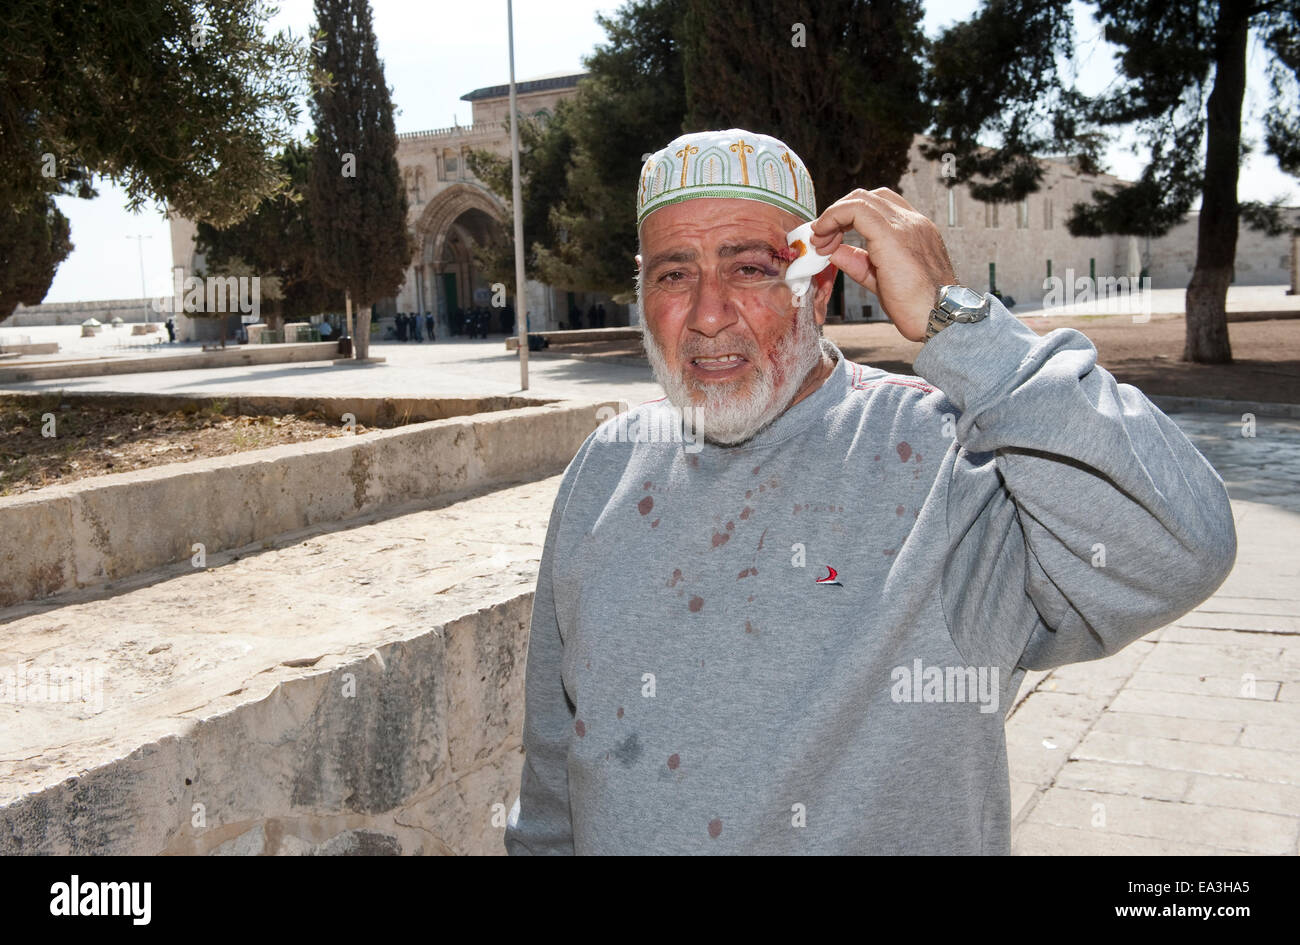 A wounded muslim is showing his wound after fighting with Israeli officers in front of the al-aqsa mosque on the temple mount Stock Photo